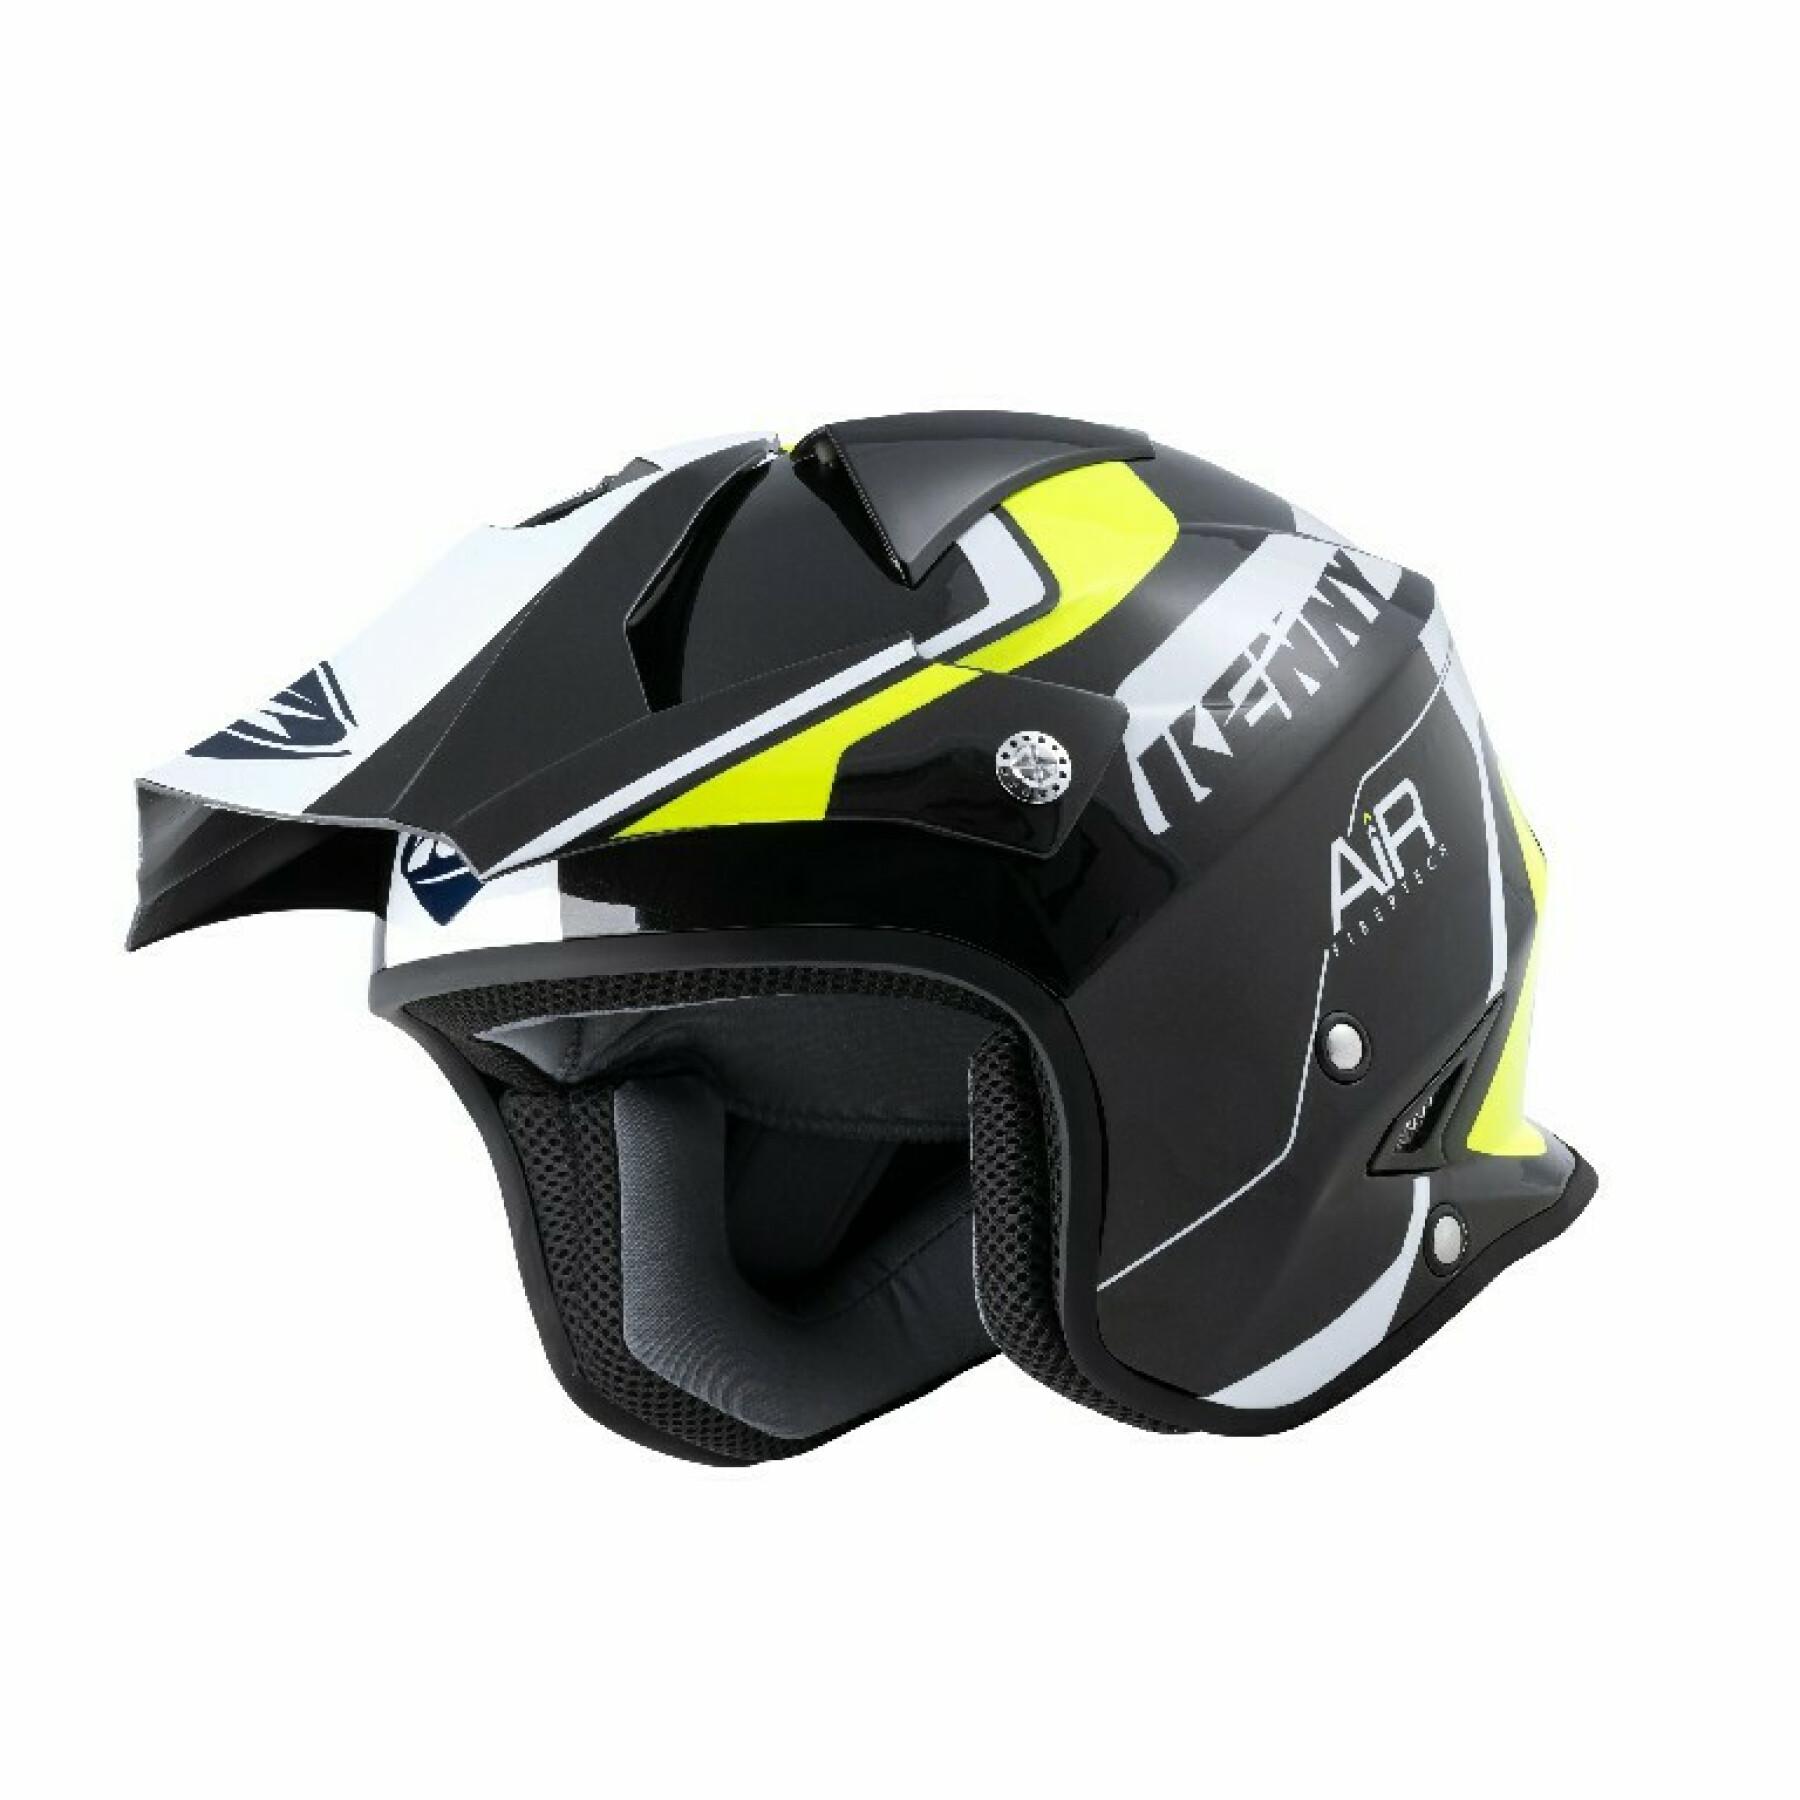 Casque moto cross Kenny trial air graphic